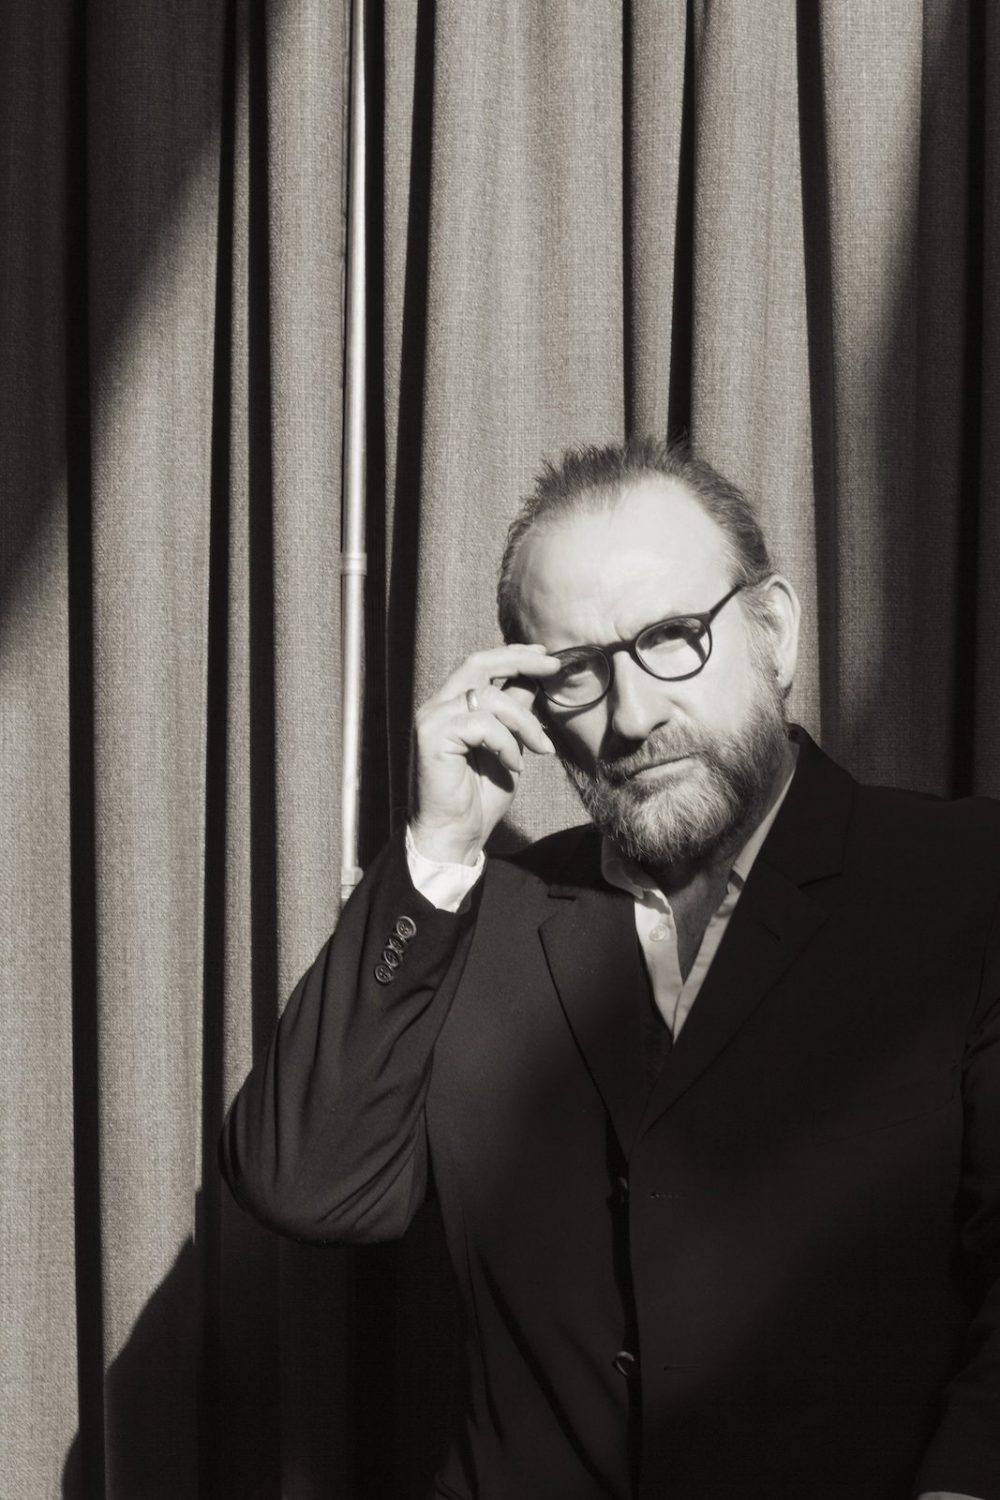 Colin Hay is ready for his Town Hall gig, talks New York, “Scrubs” and more